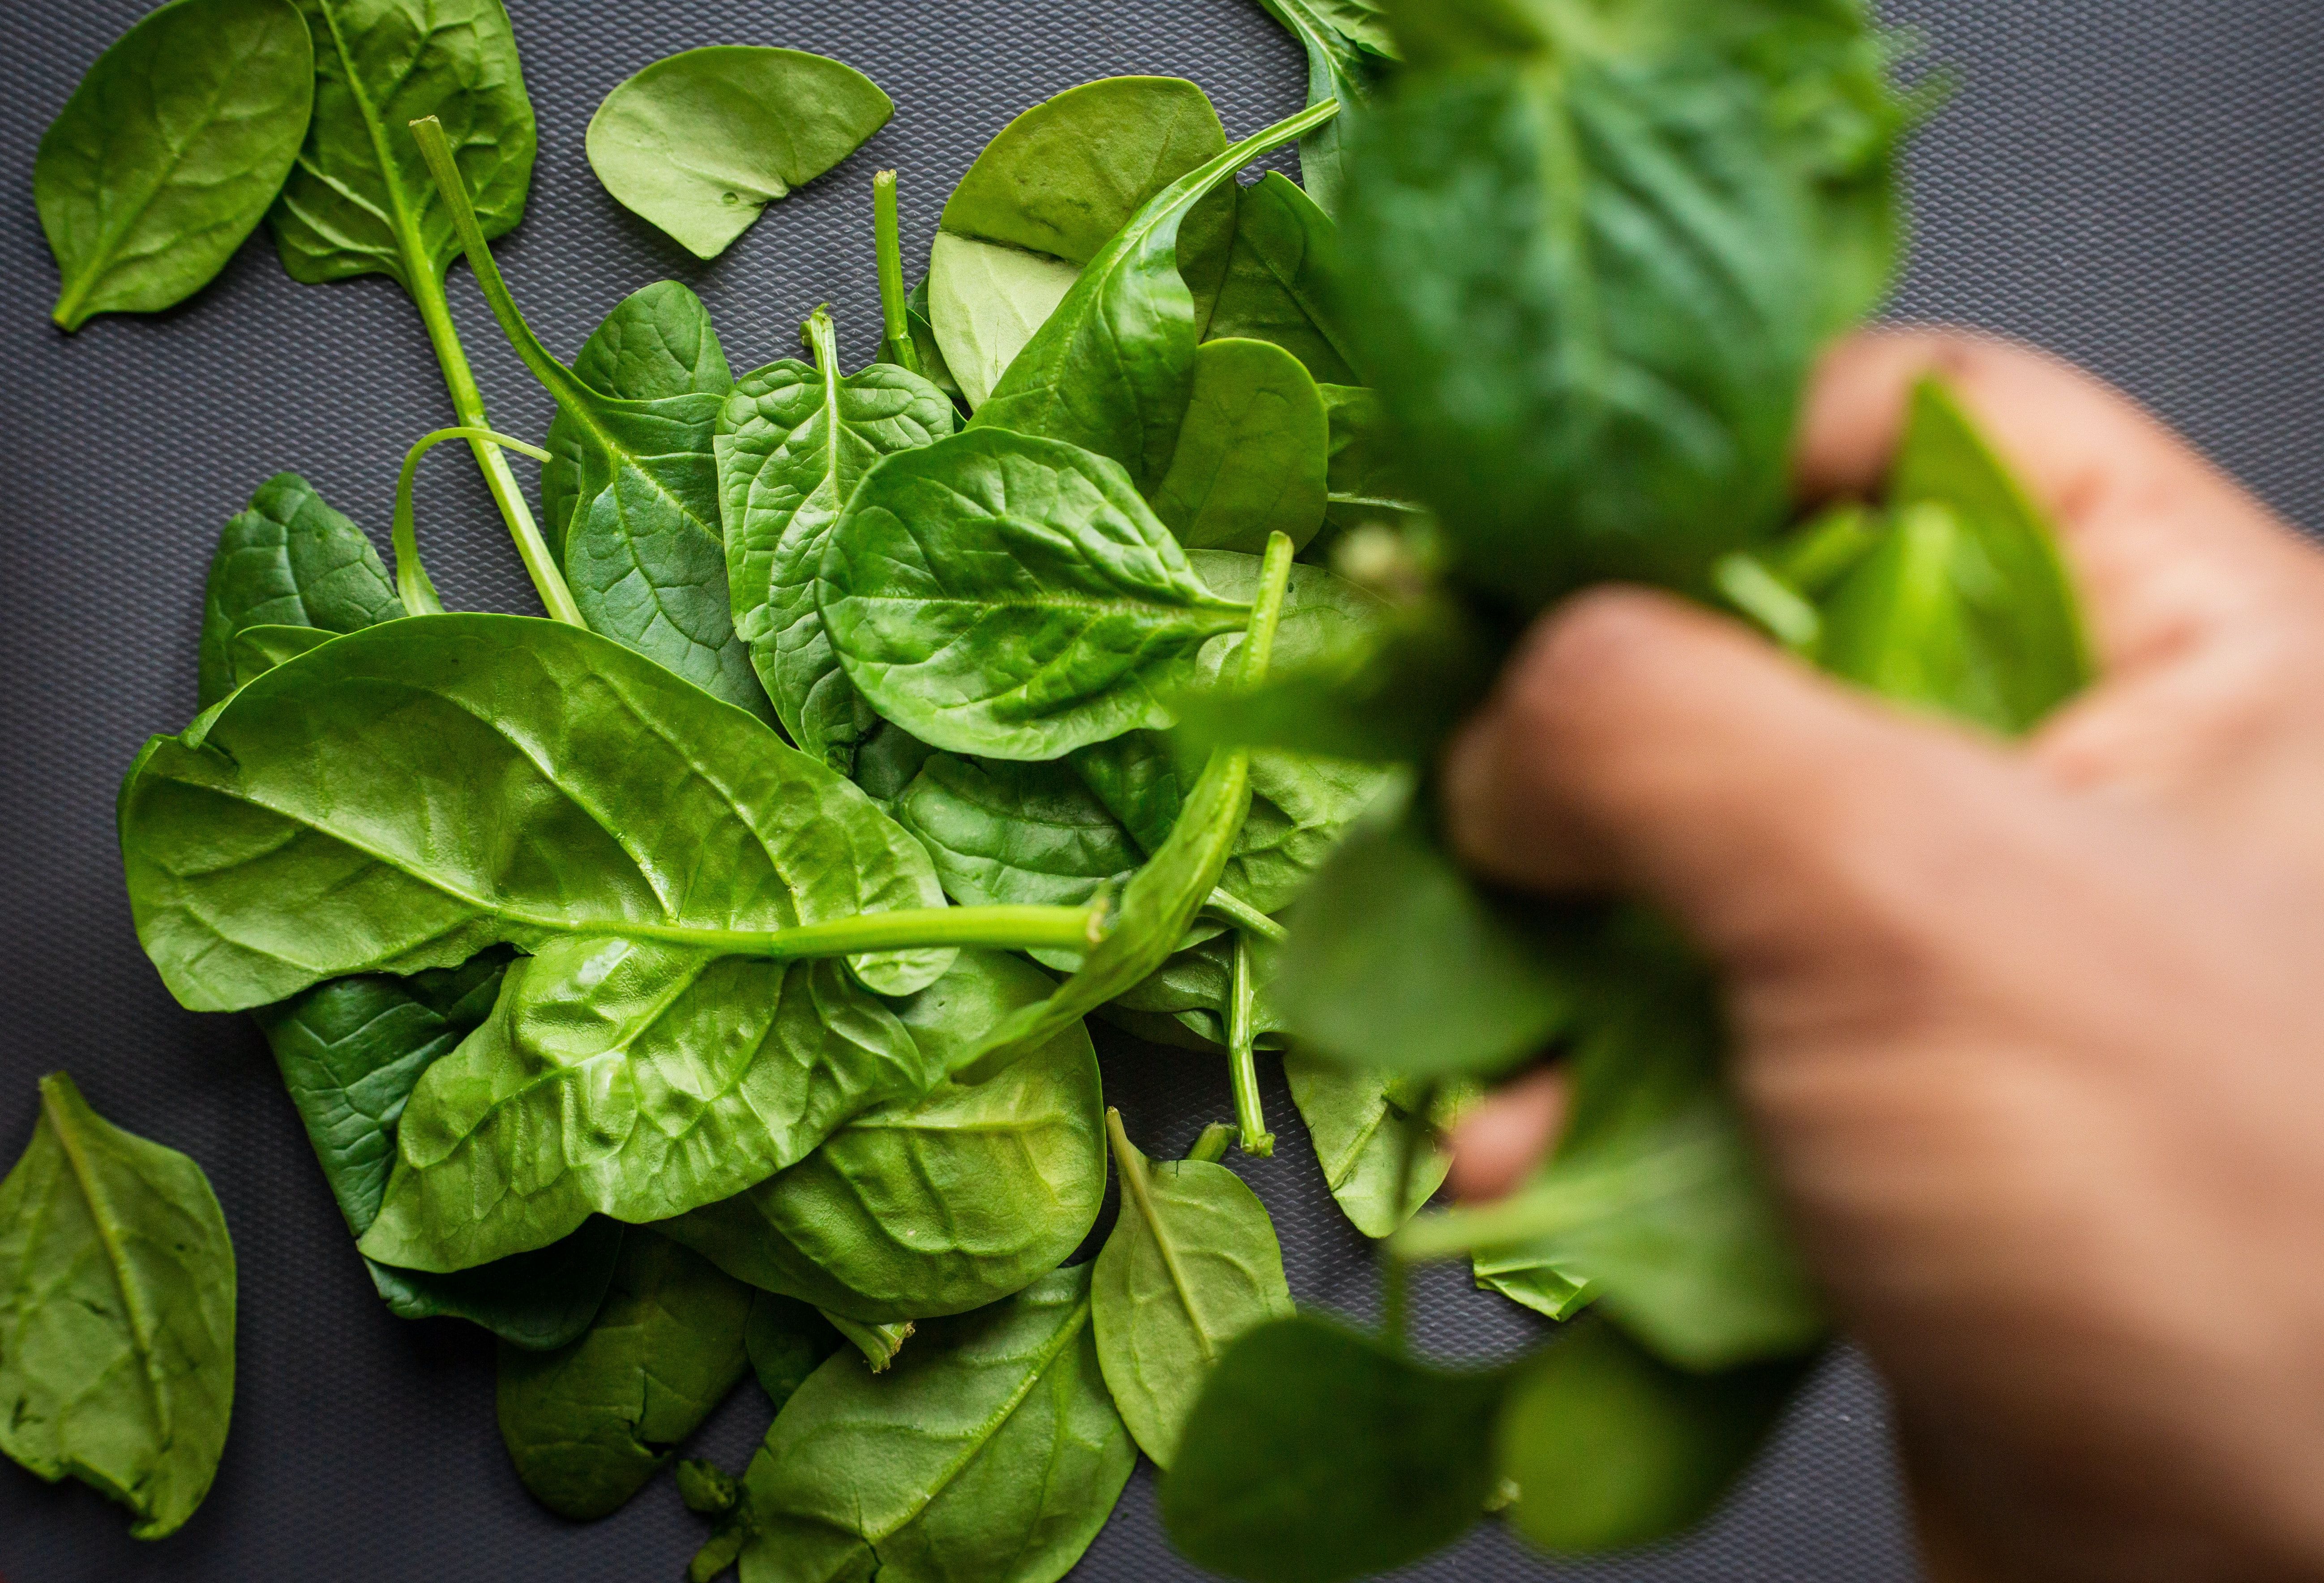 Why is spinach a superfood?